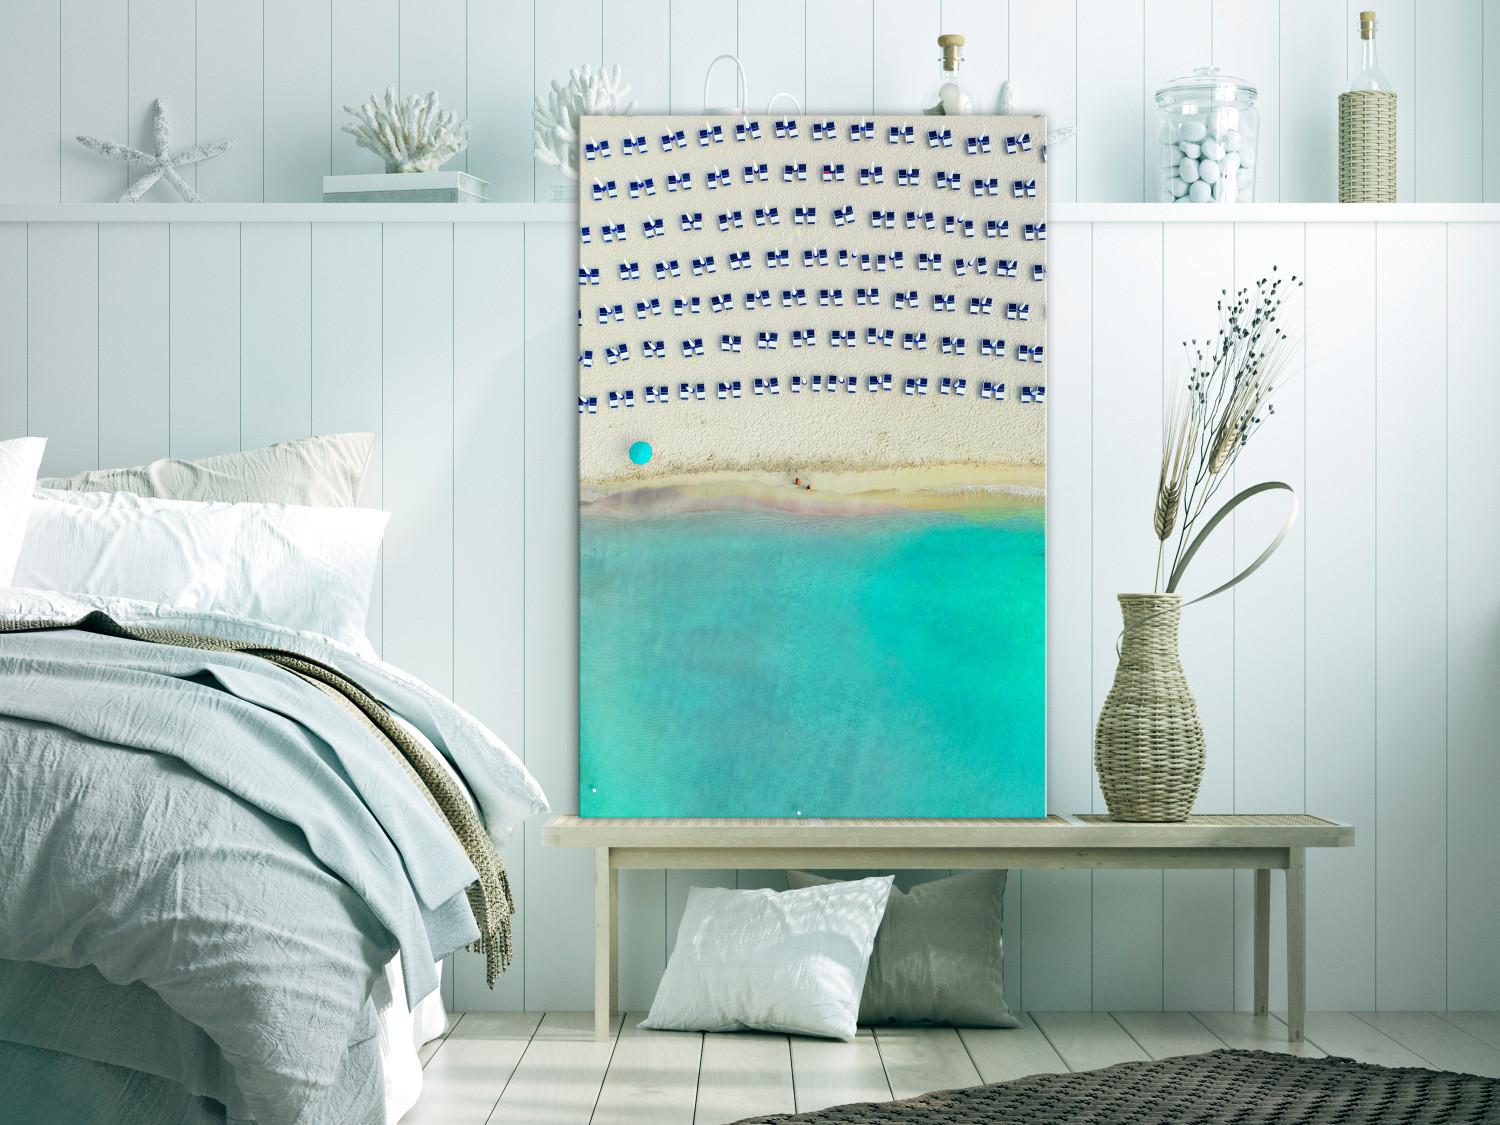 Canvas Italian beach - sea landscape seen from above with azure water